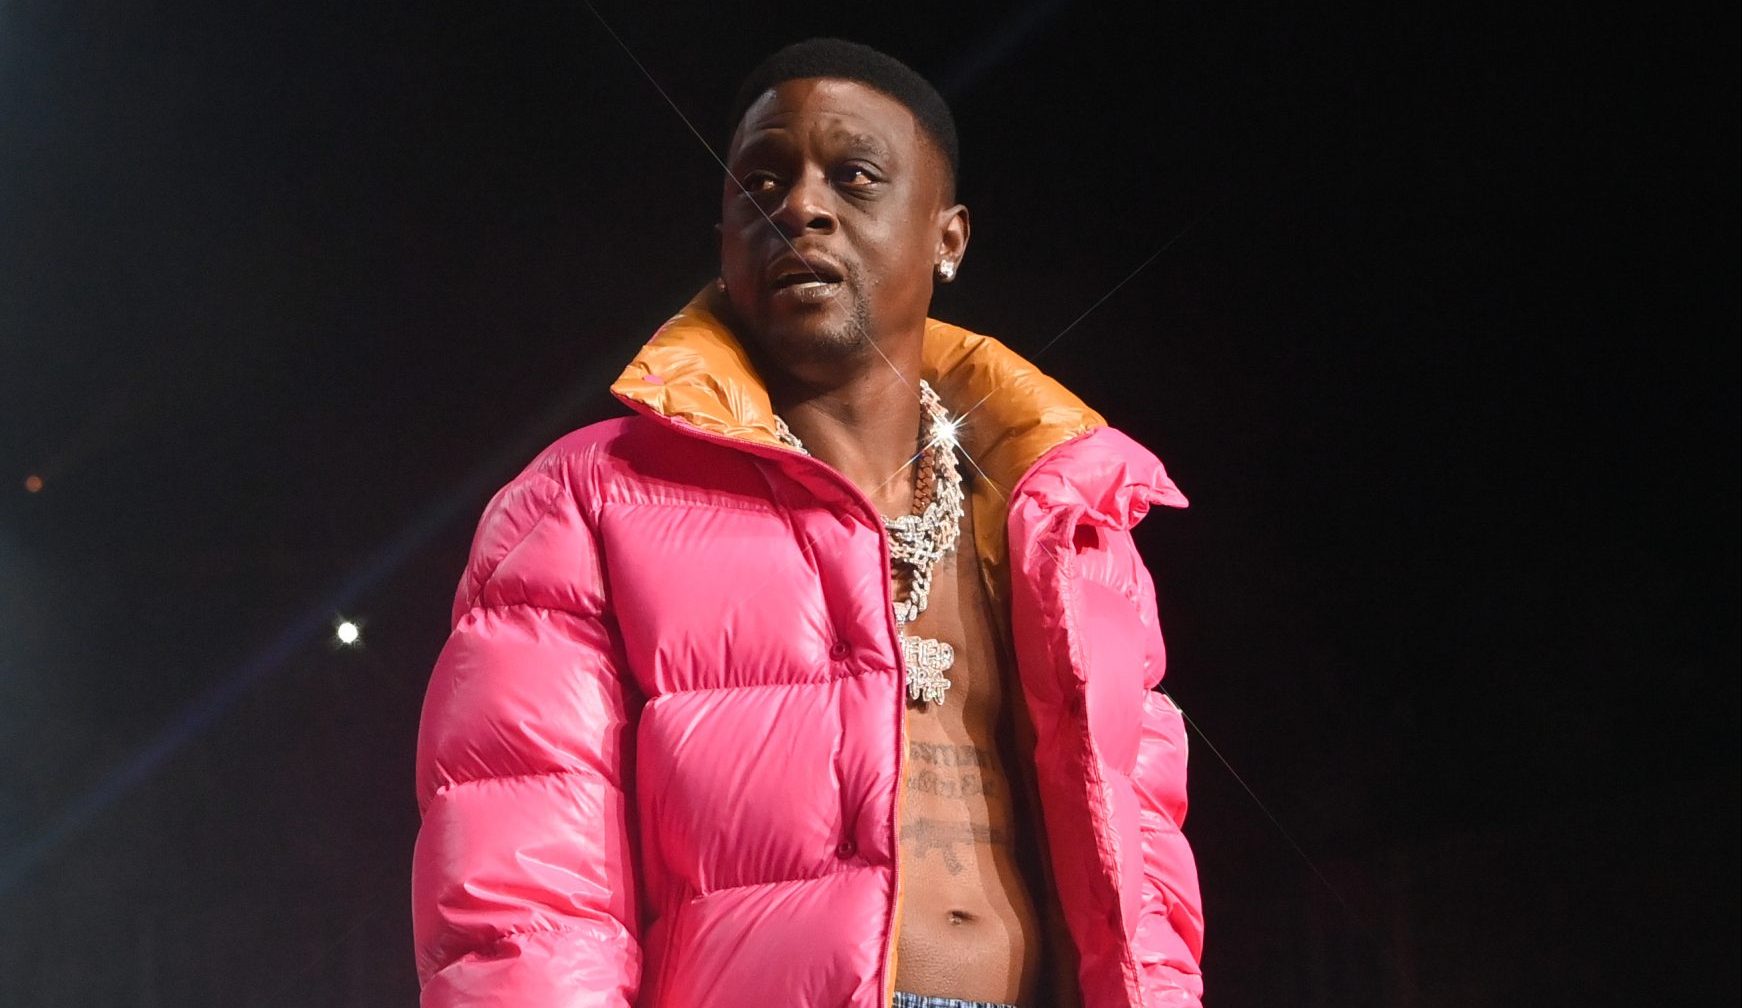 Boosie shared his latest encounter with police after being pulled over and rapped his hit single "Set It Off."